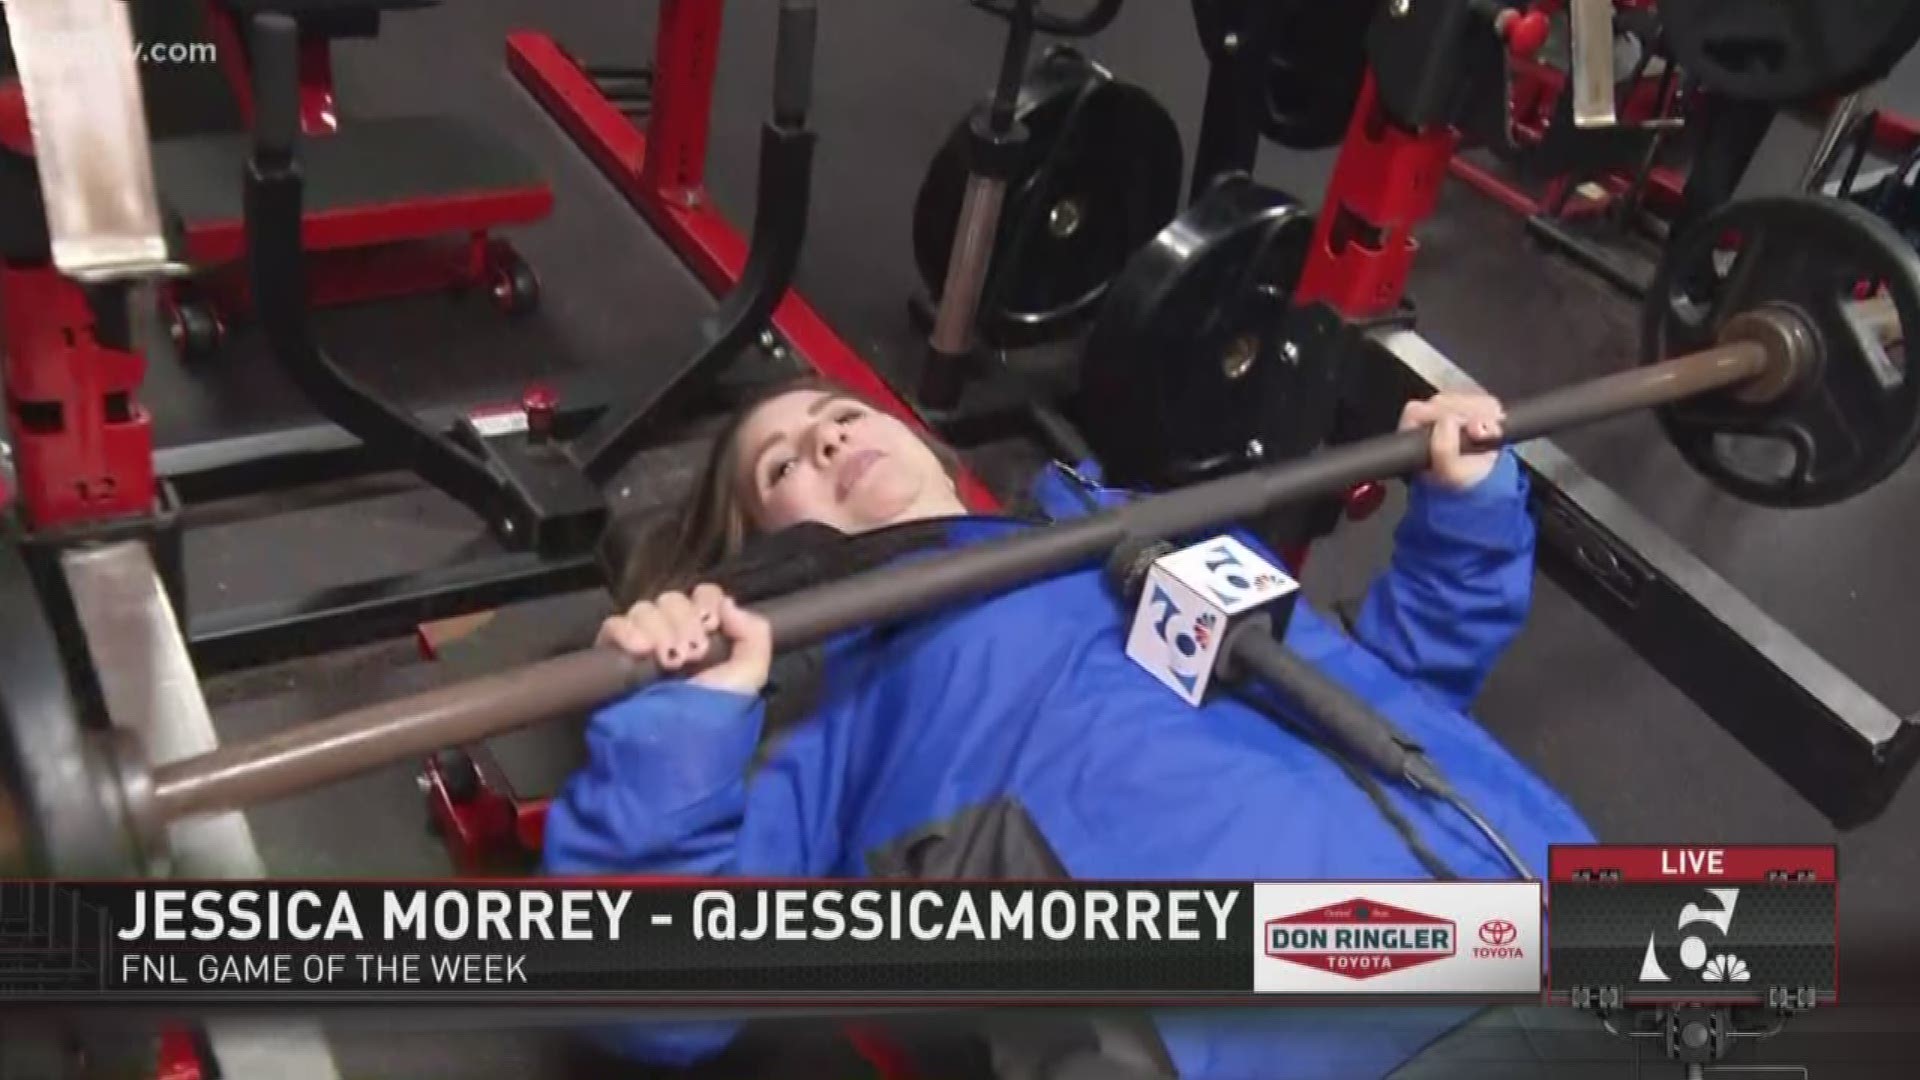 FNL GAME OF THE WEEK: Jessica Morrey live from the West weight room